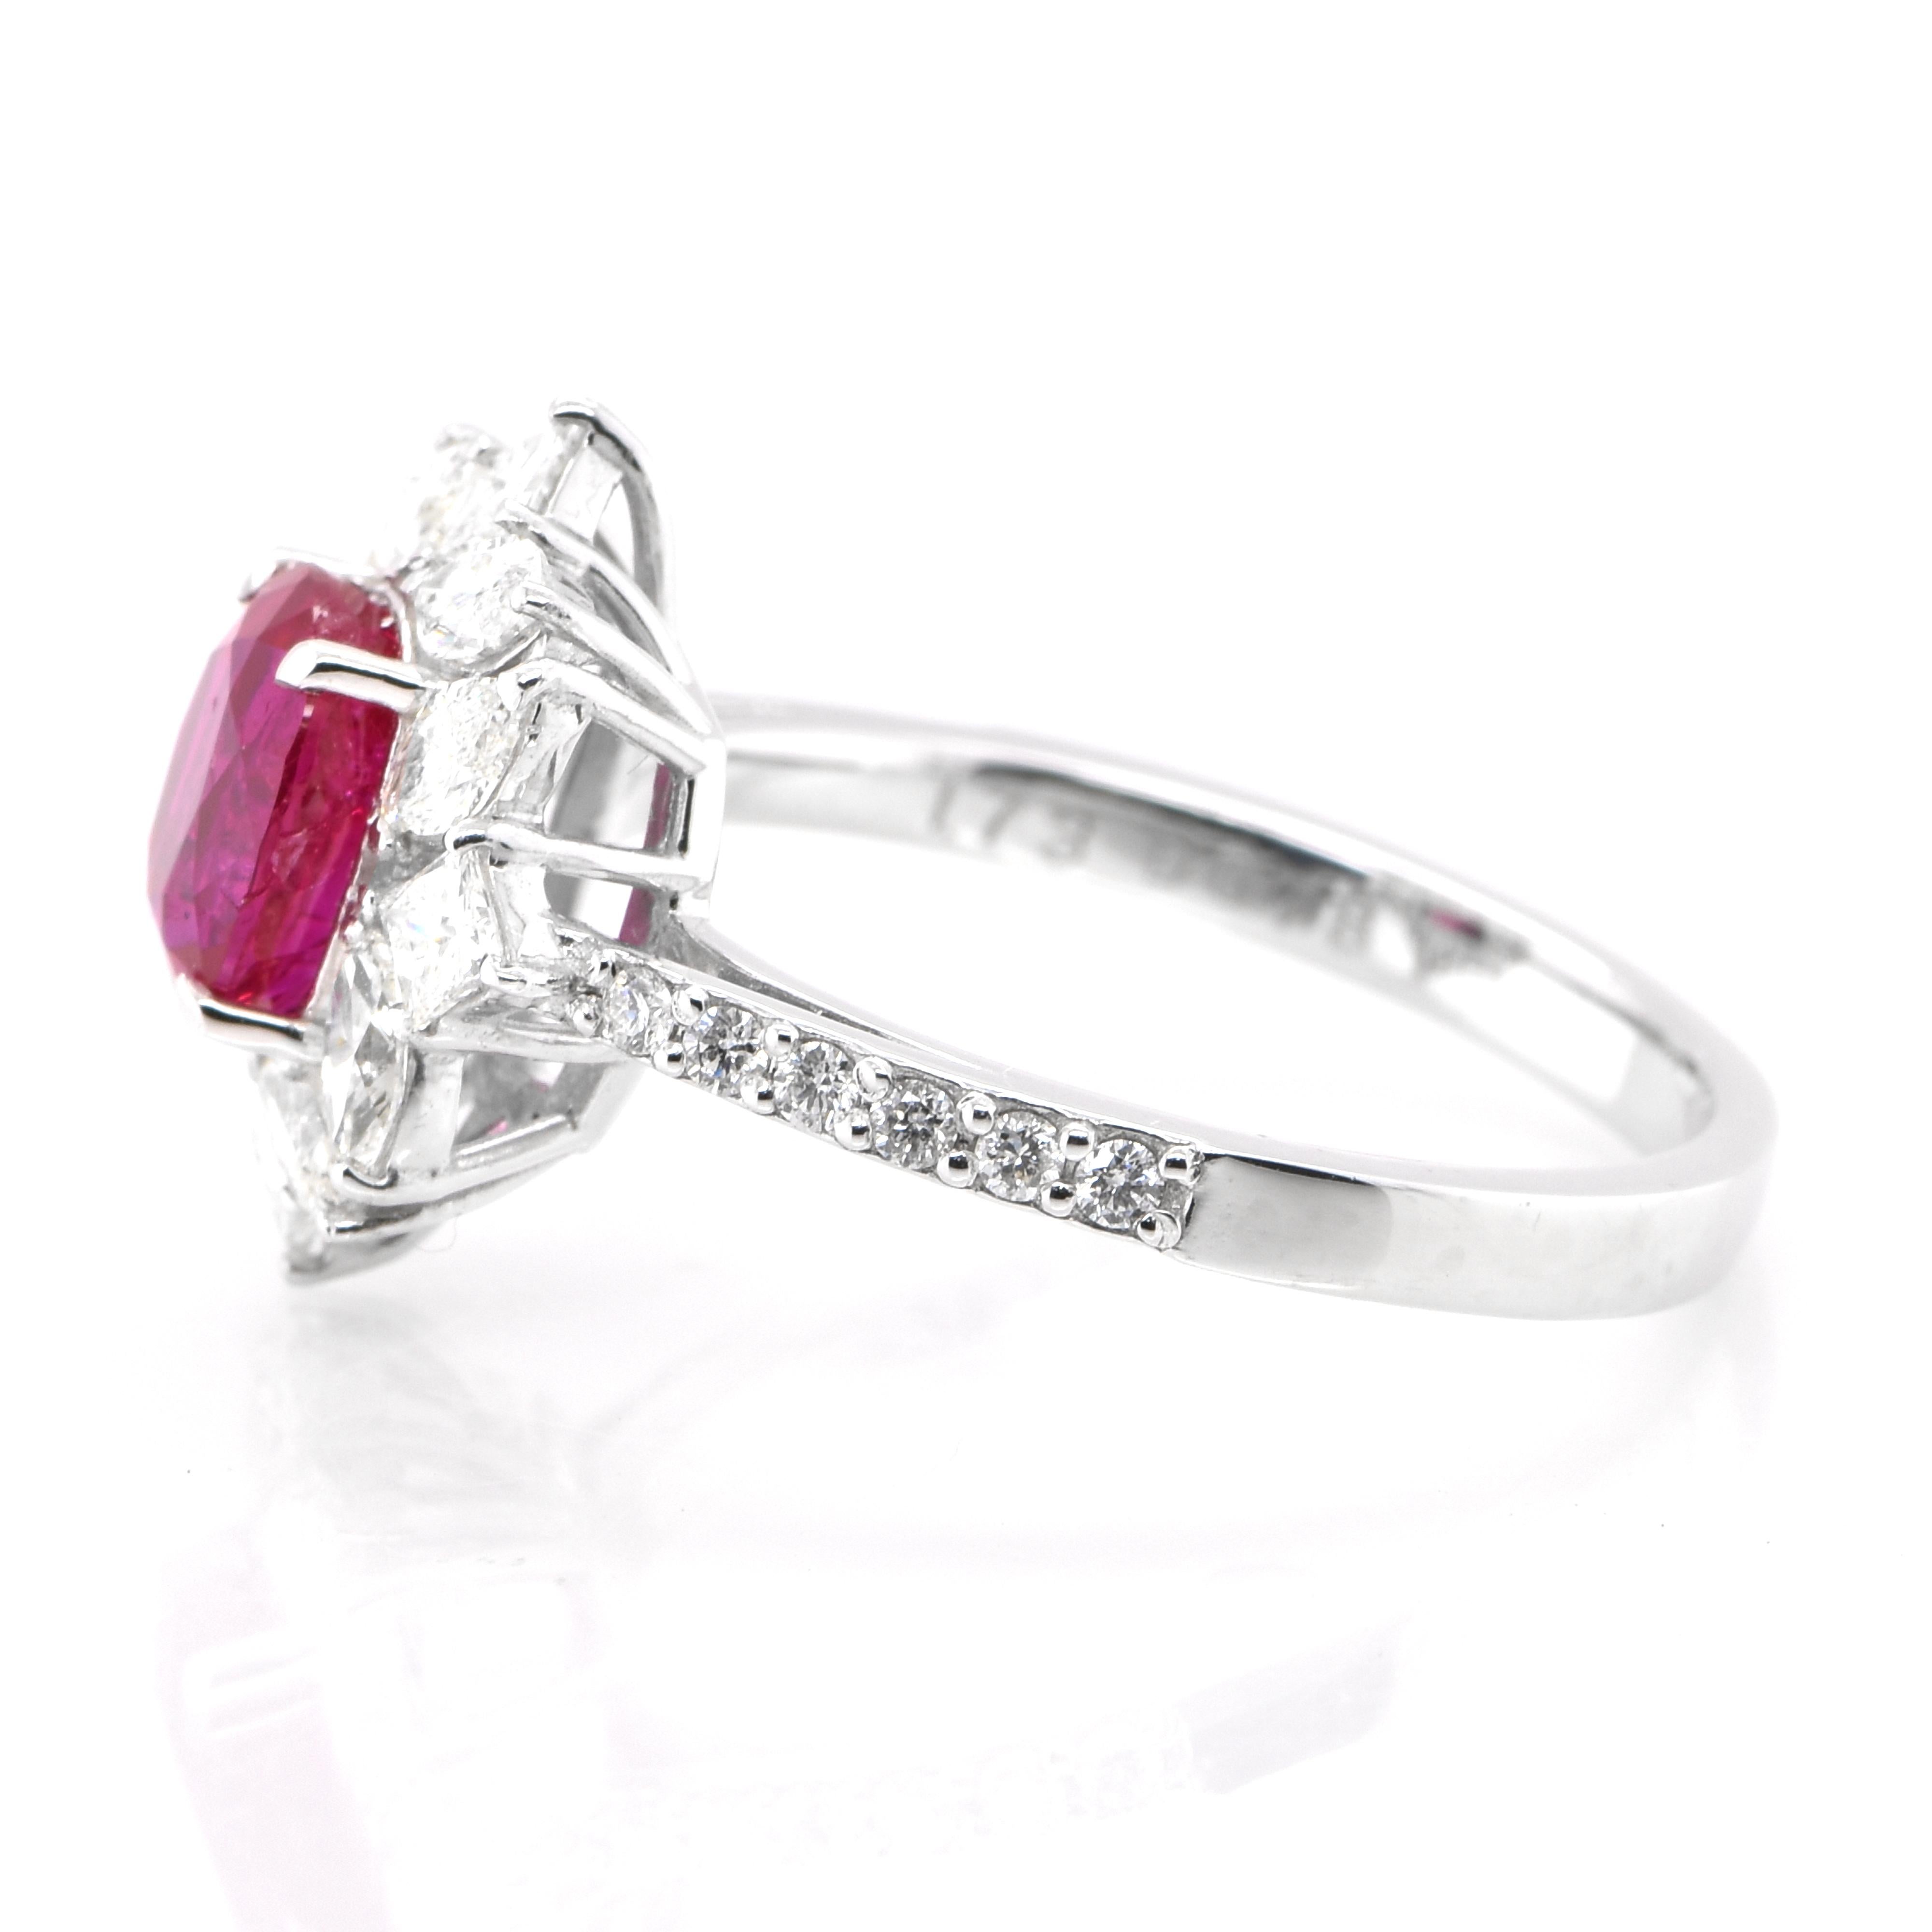 Oval Cut GIA Certified 1.73 Carat, Unheated, Burmese Ruby & Diamond Ring set in Platinum For Sale